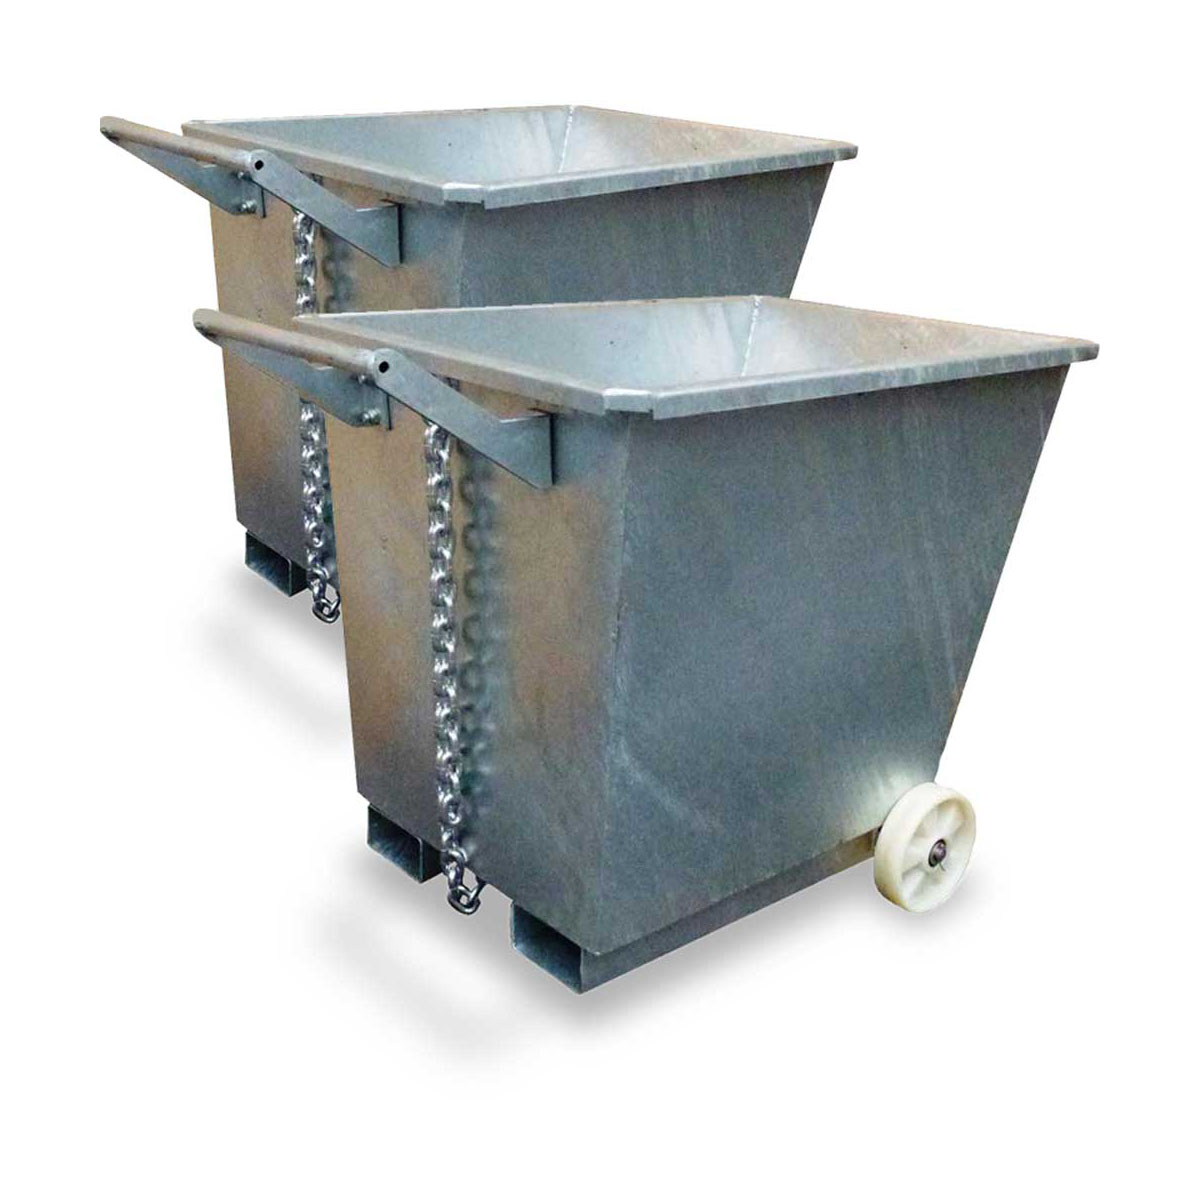 Buy Hopper - Hand-Tipping in Waste Management  from Astrolift NZ